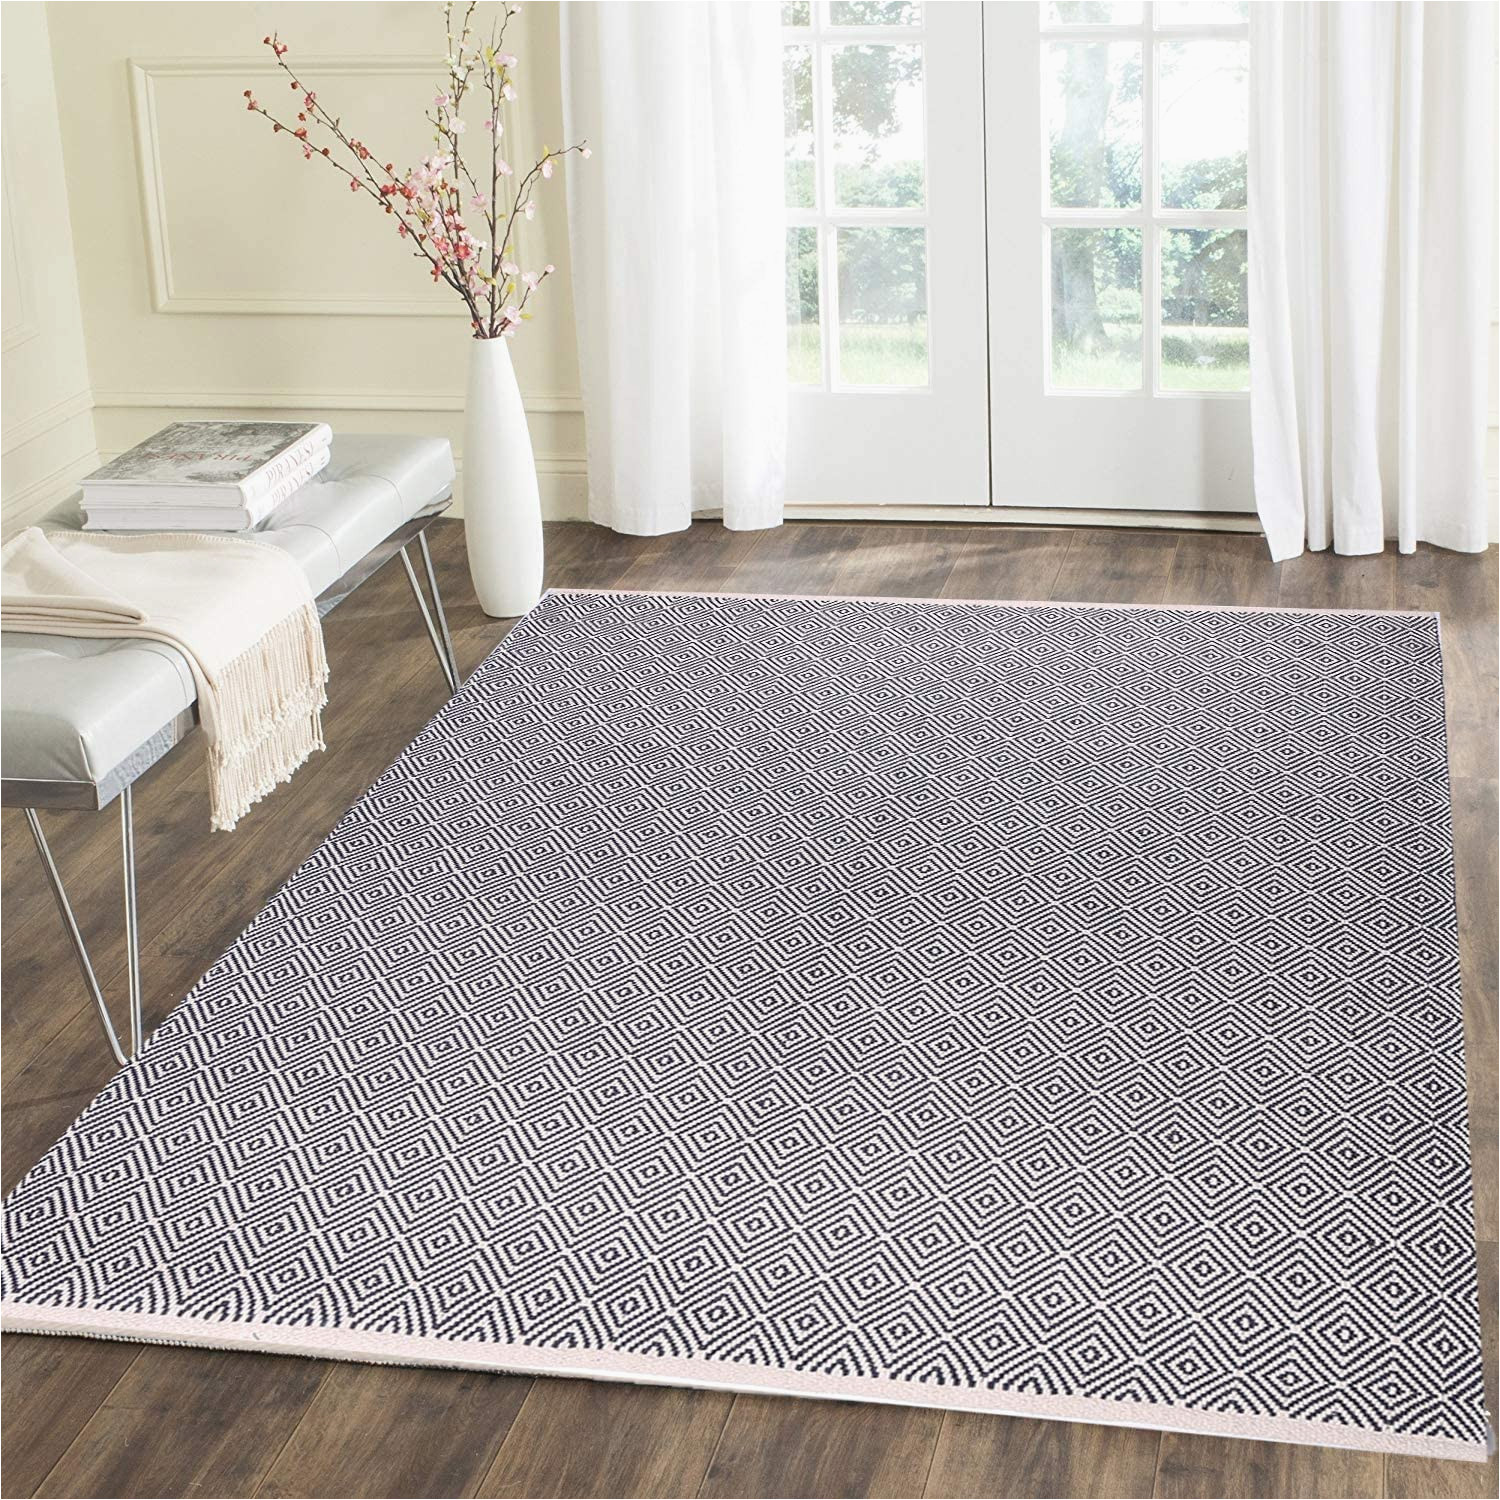 4 X 6 Washable area Rugs U’artlines Cotton area Rug 4′ X 6′ Machine Washable Reversible Indoor area Rug/mat Hand Woven Cotton area Rugs for Living Room, Bedroom, Laundry Room, …